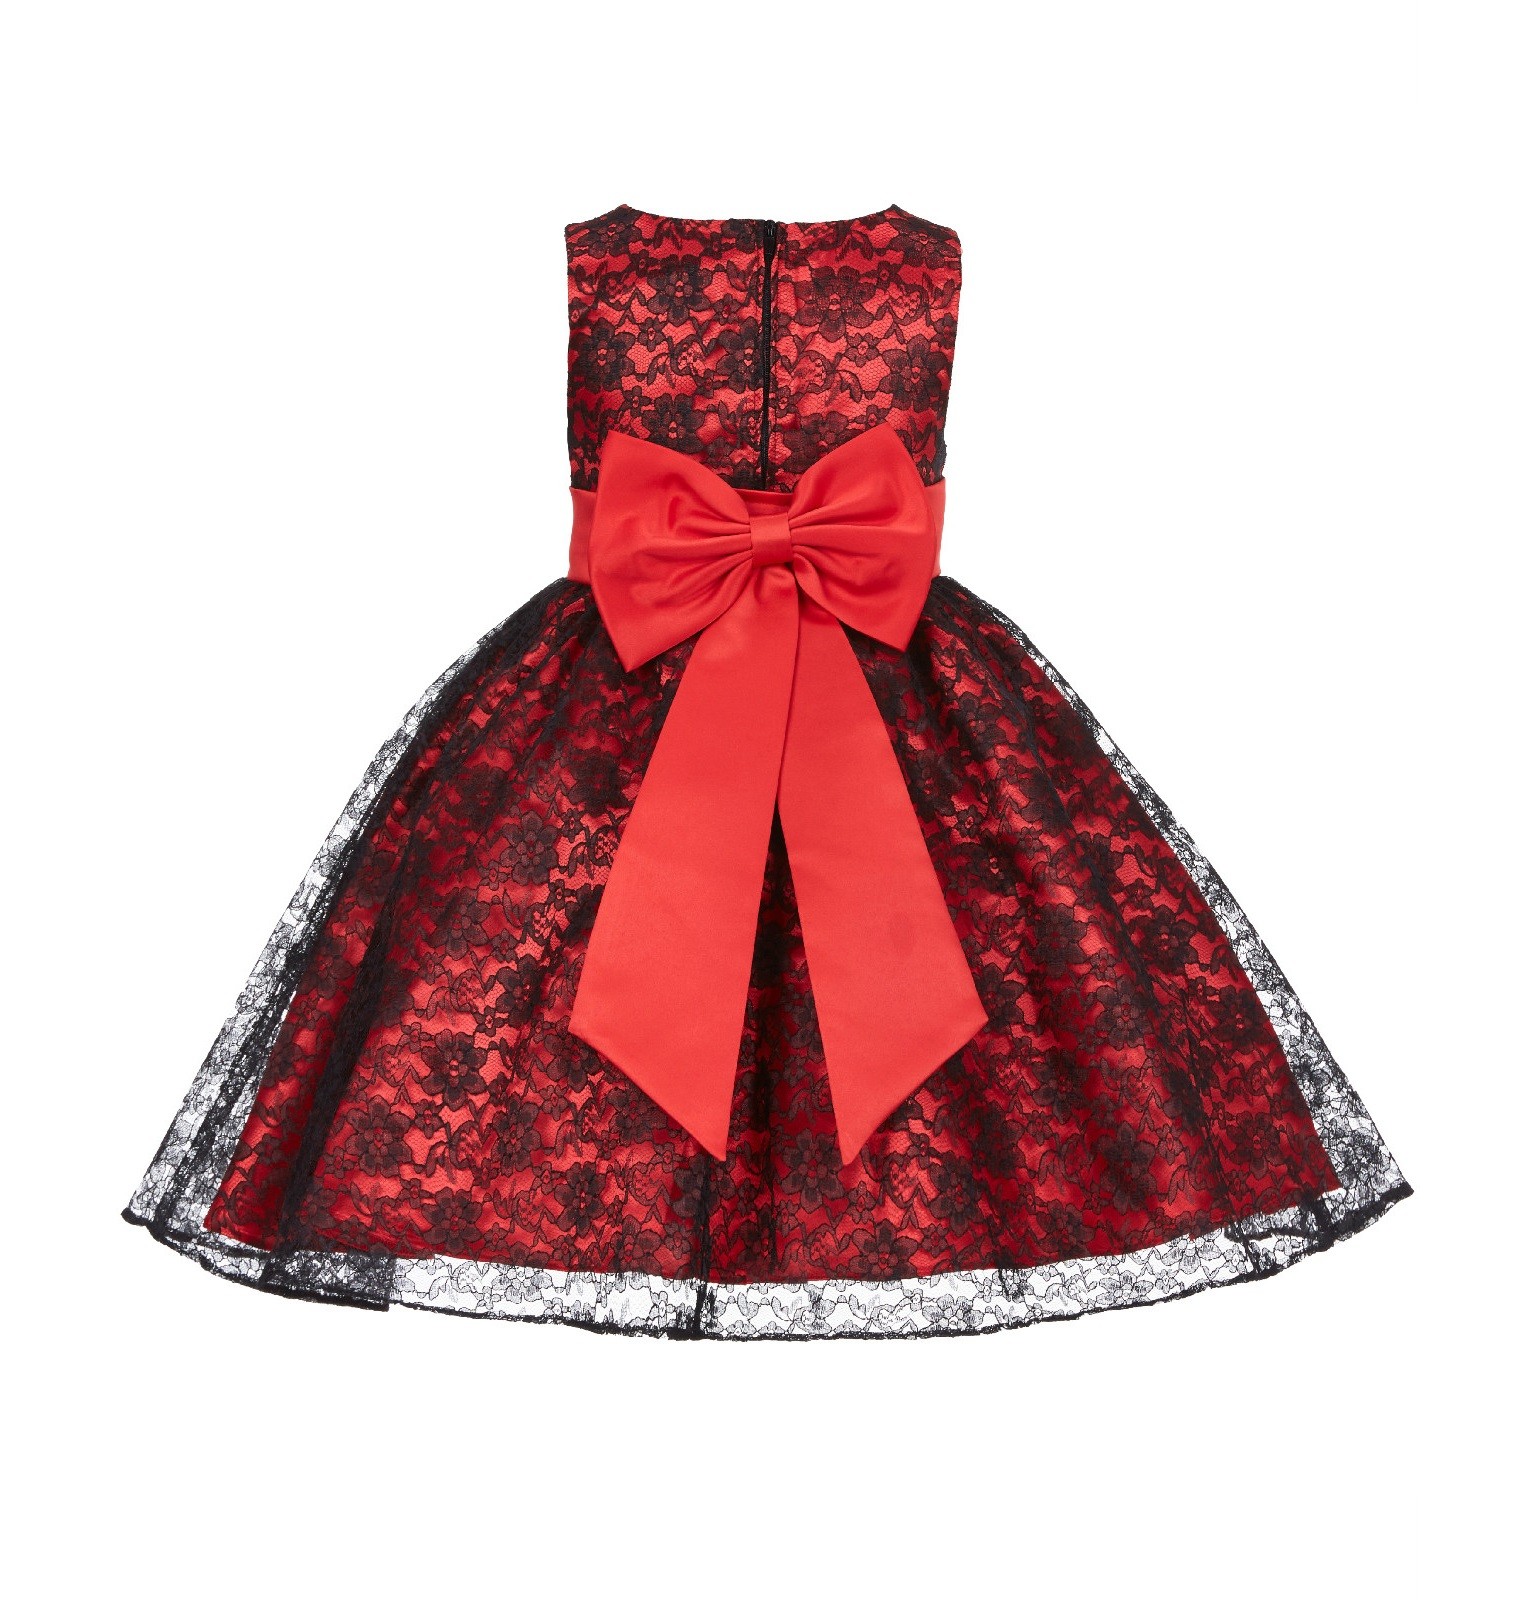 red dress black lace overlay